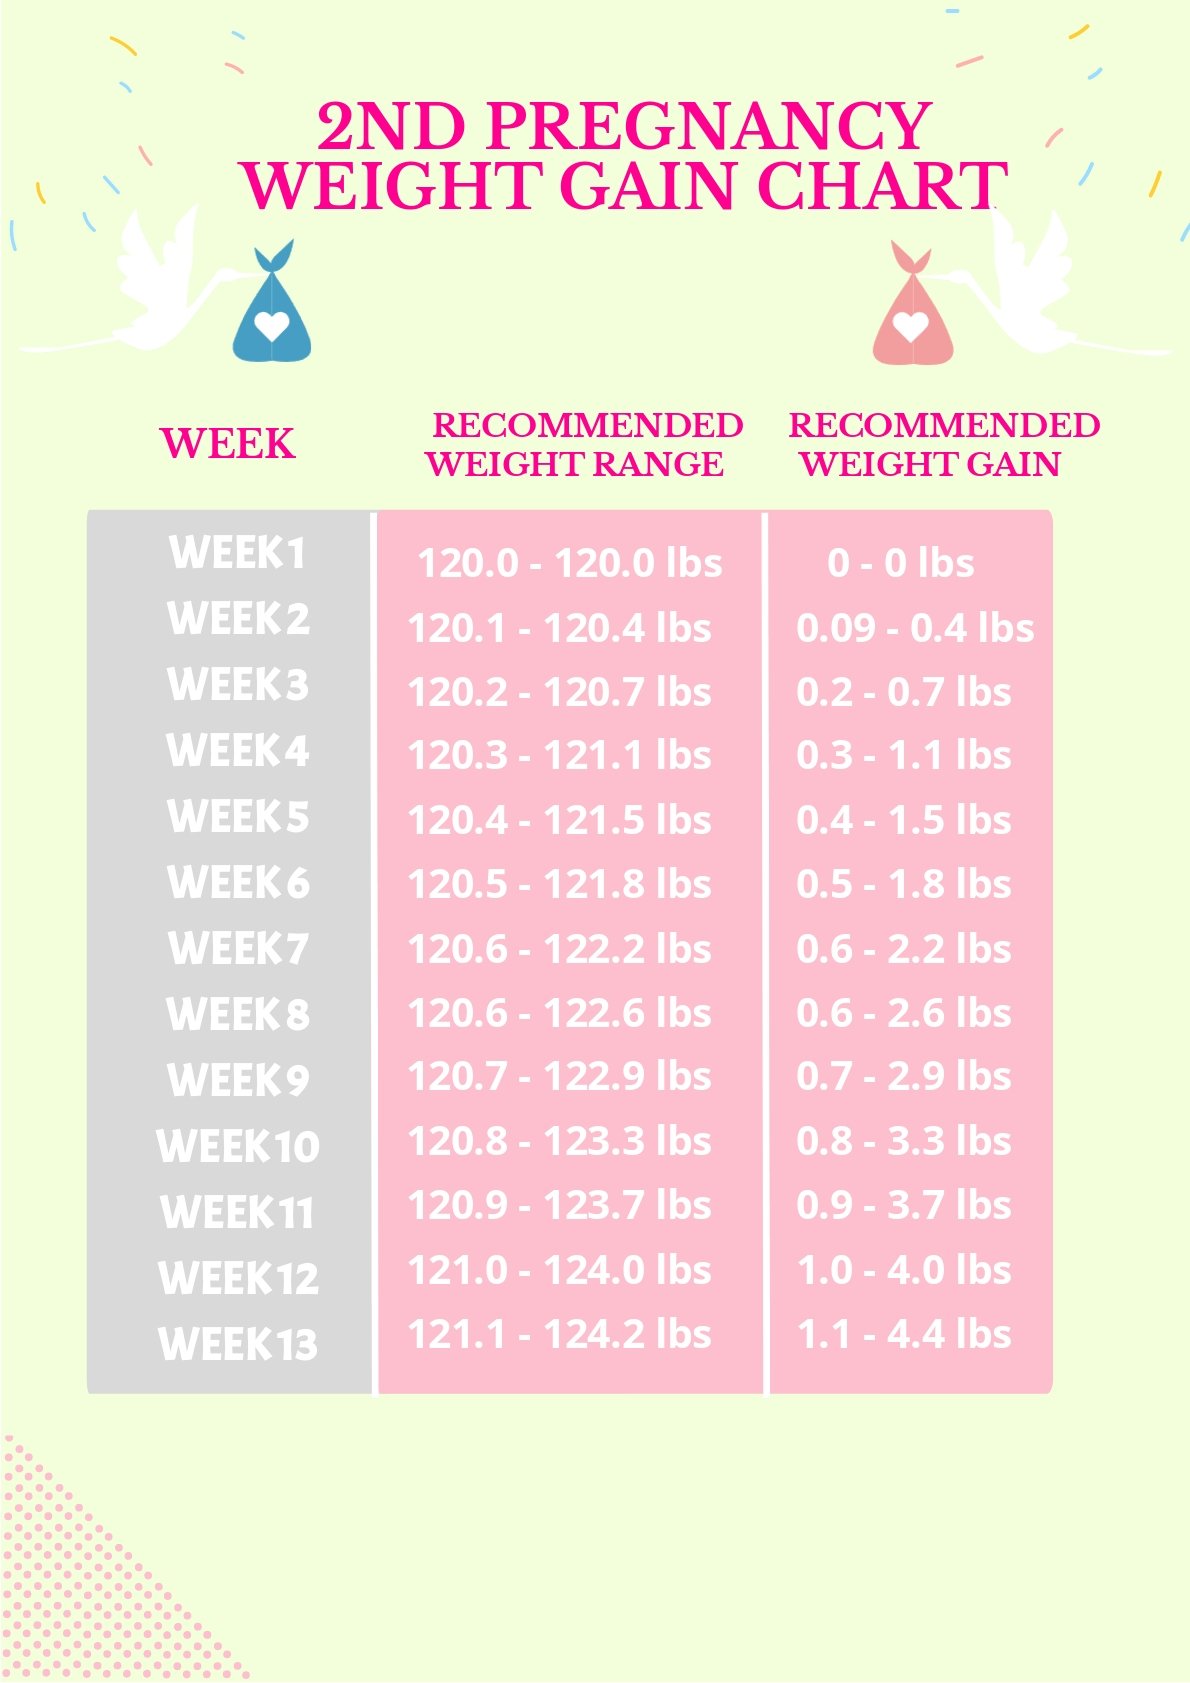 2nd Pregnancy Weight Gain Chart Template